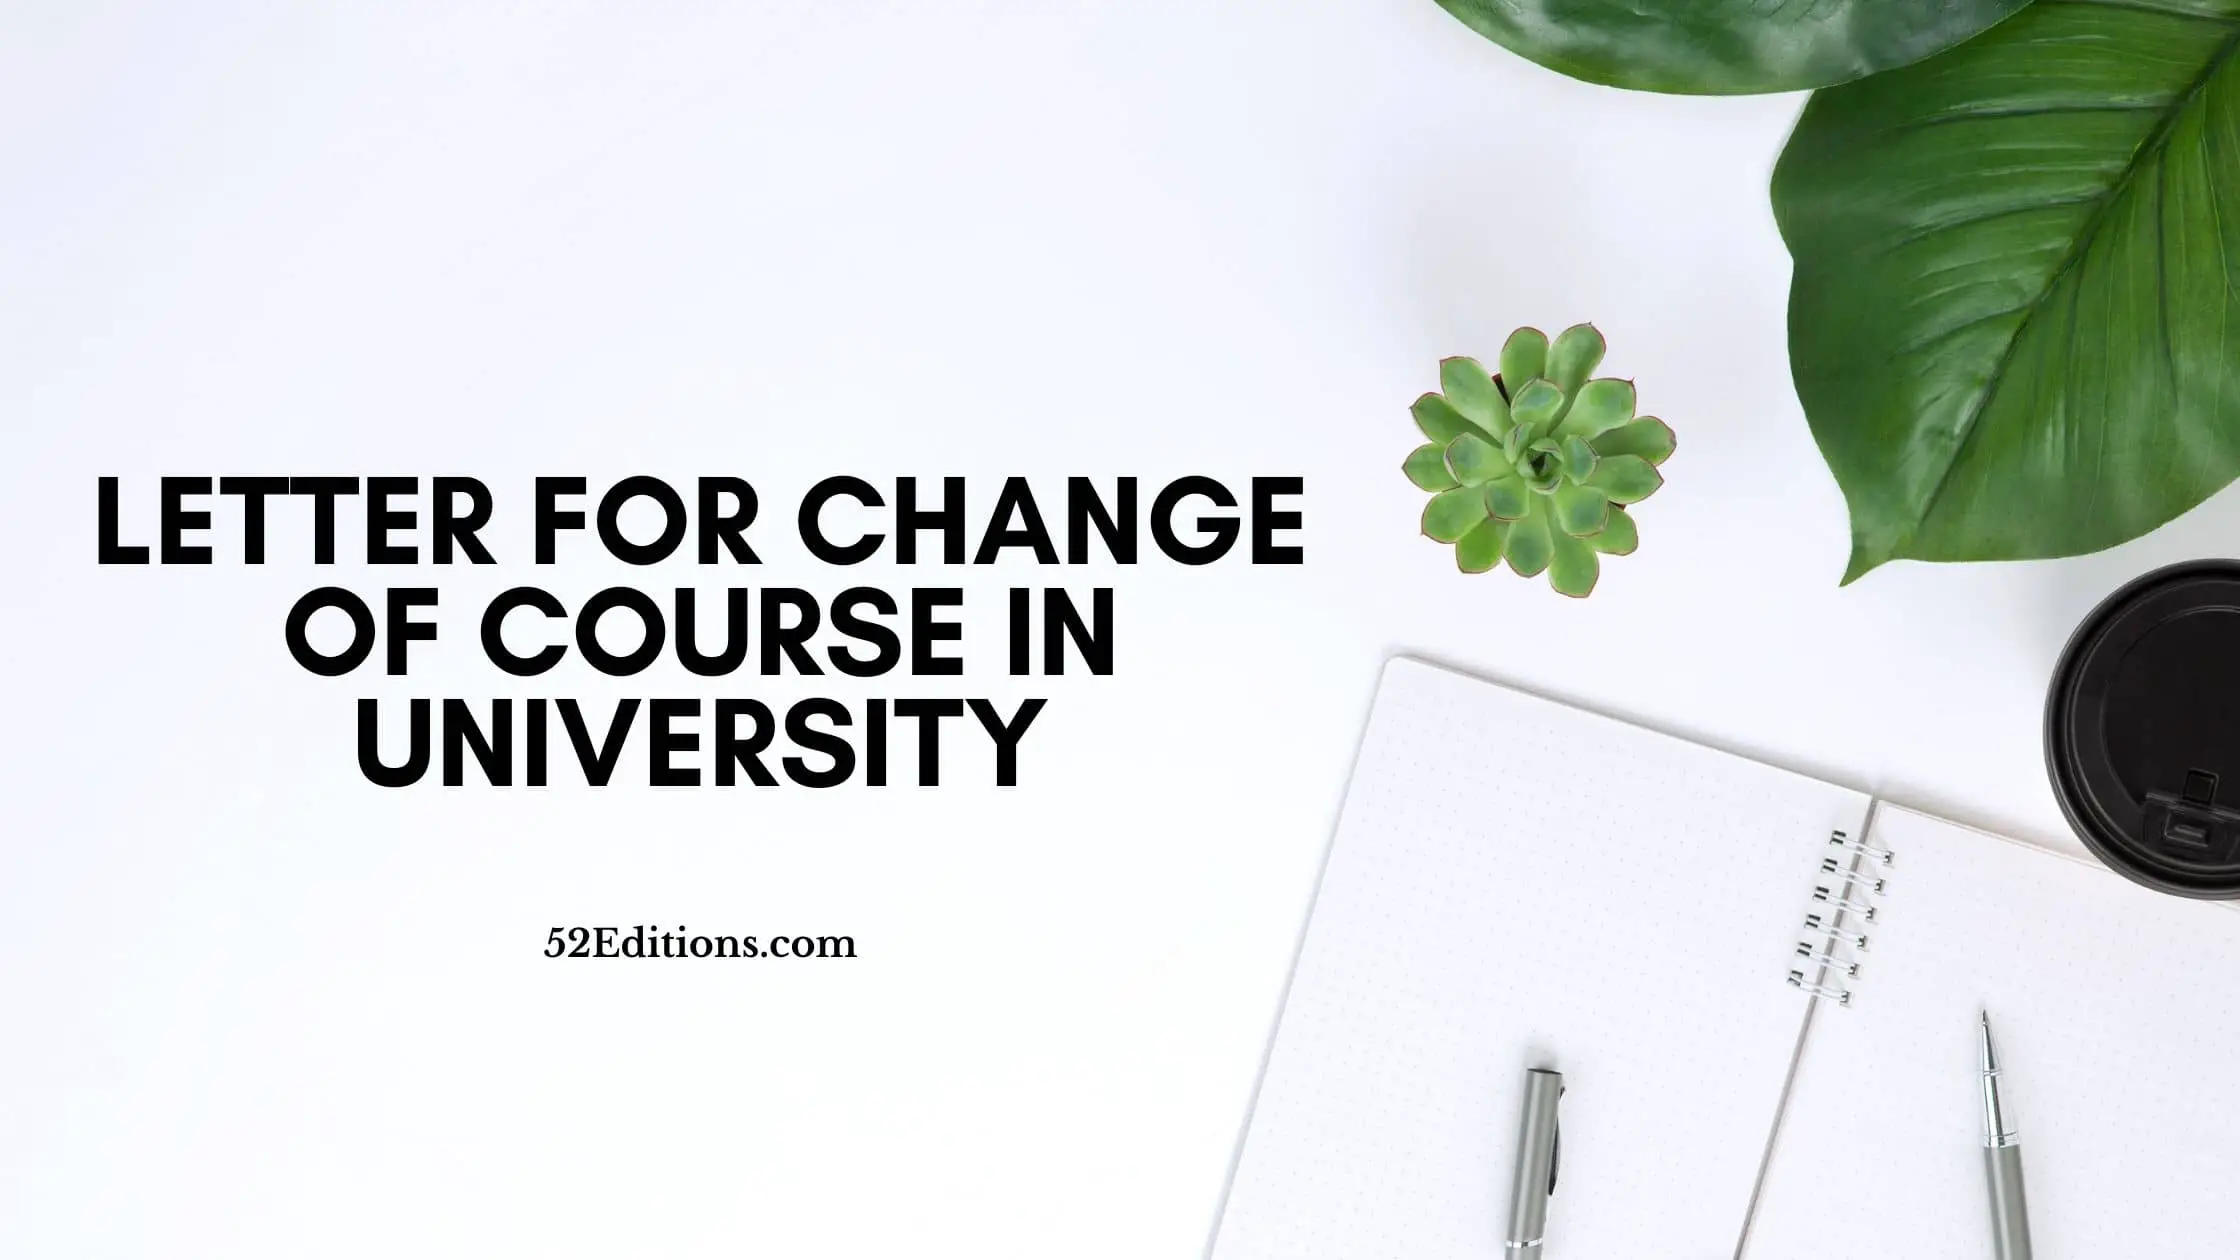 Sample Application Letter For Change of Course in University